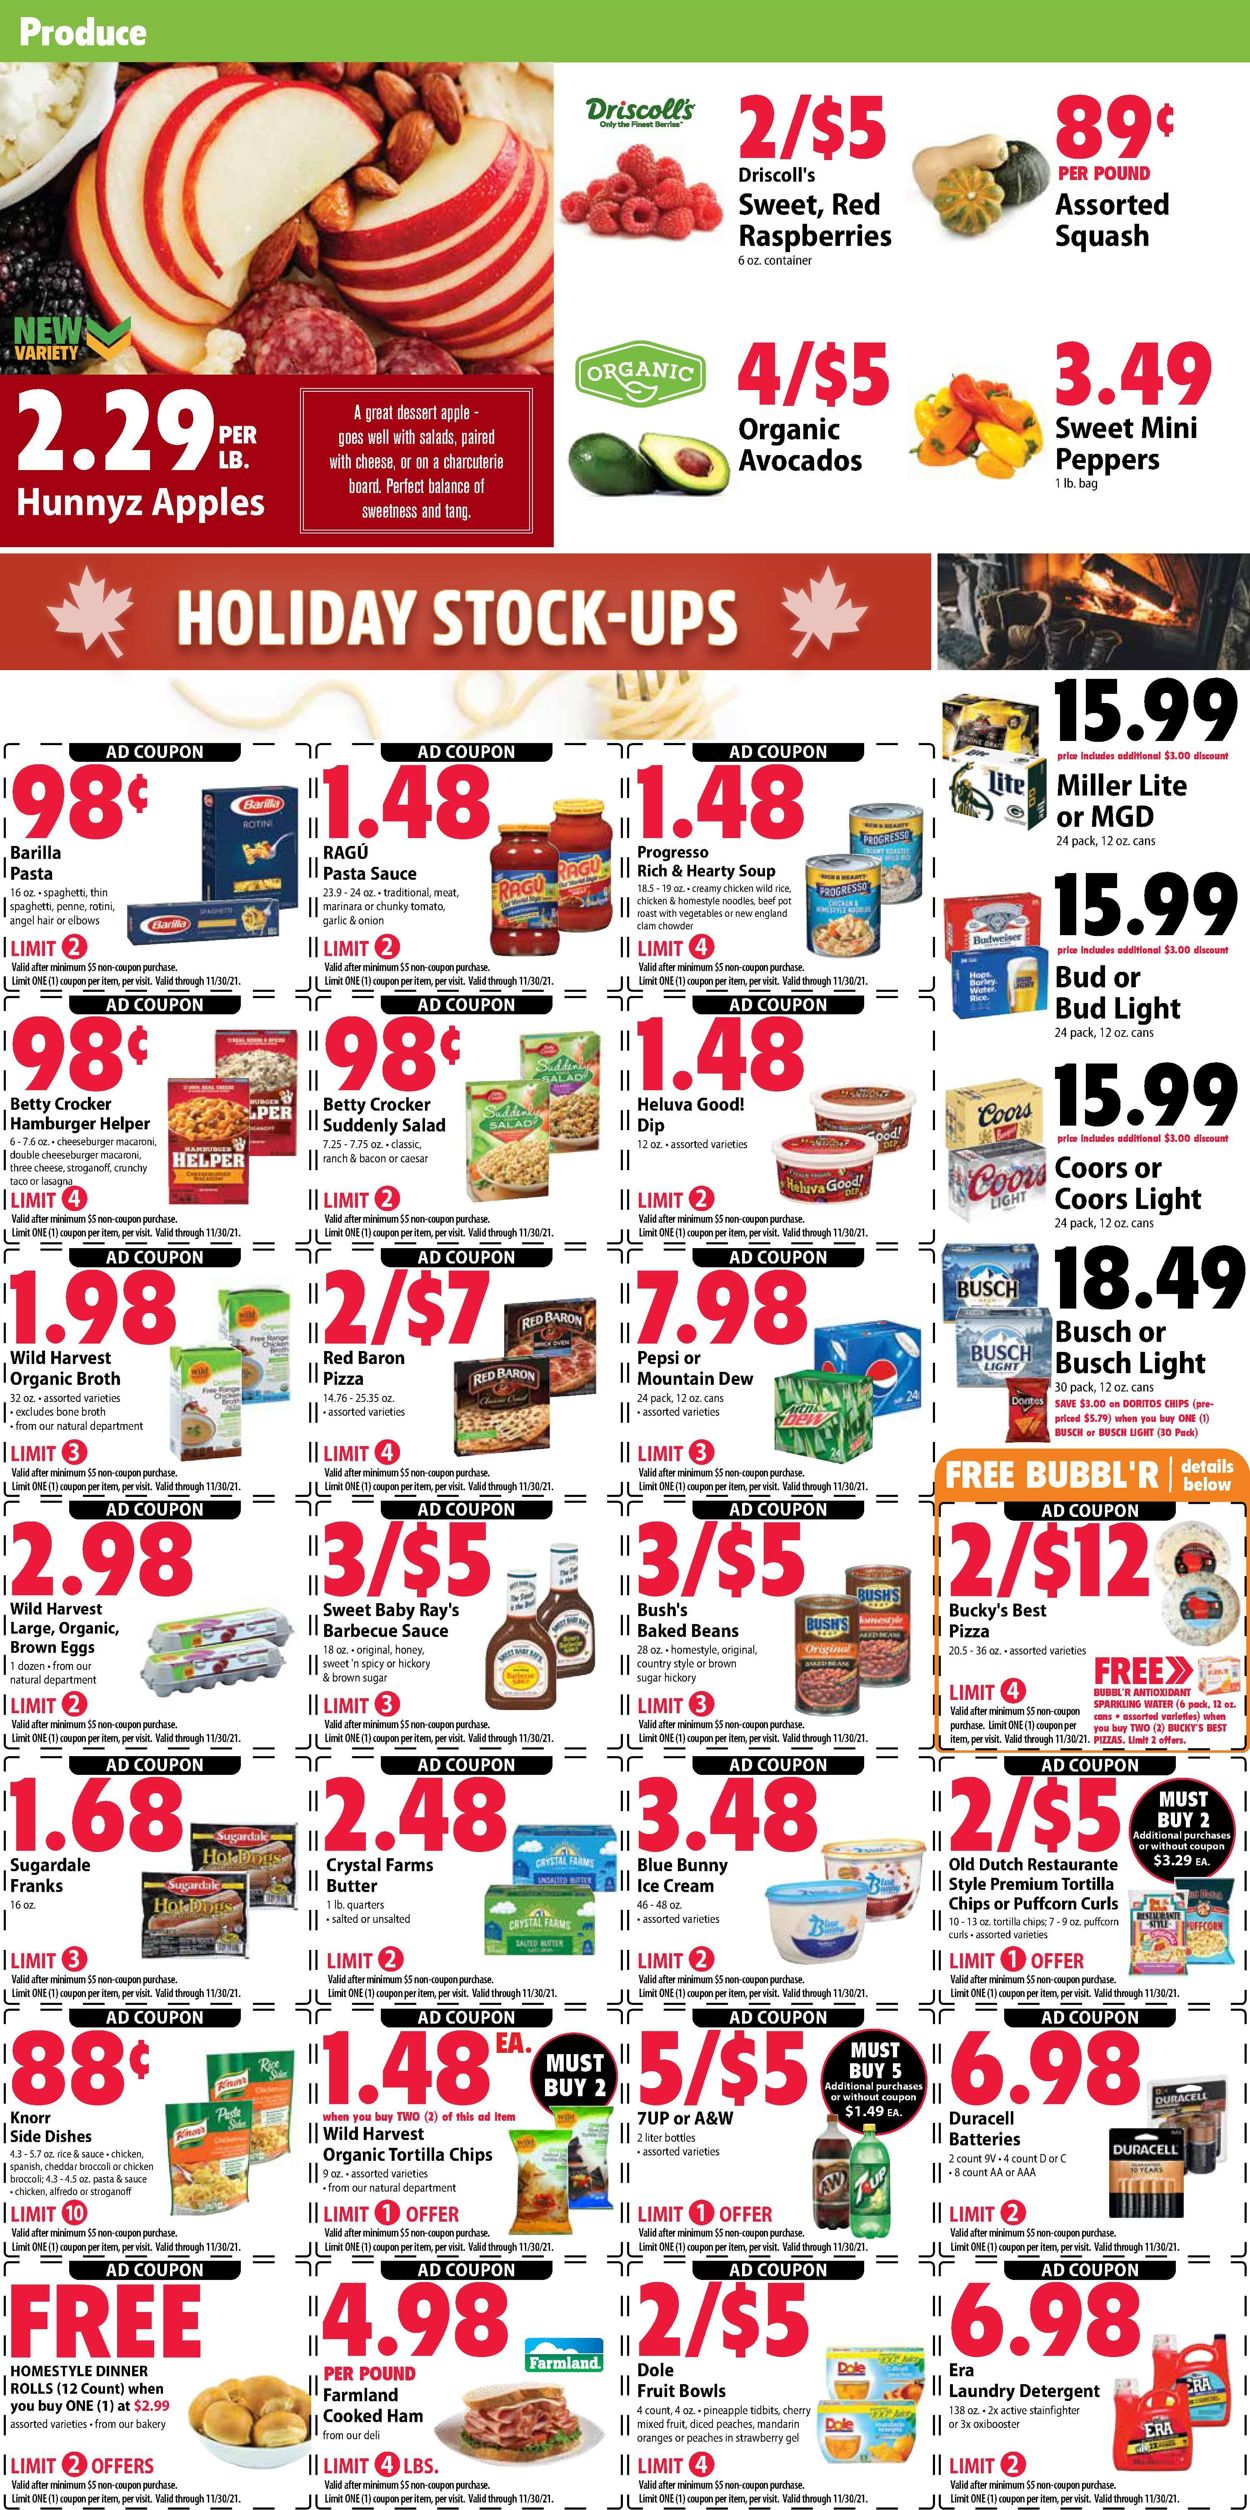 Festival Foods HOLIDAY 2021 Weekly Ad Circular - valid 11/24-11/30/2021 (Page 4)